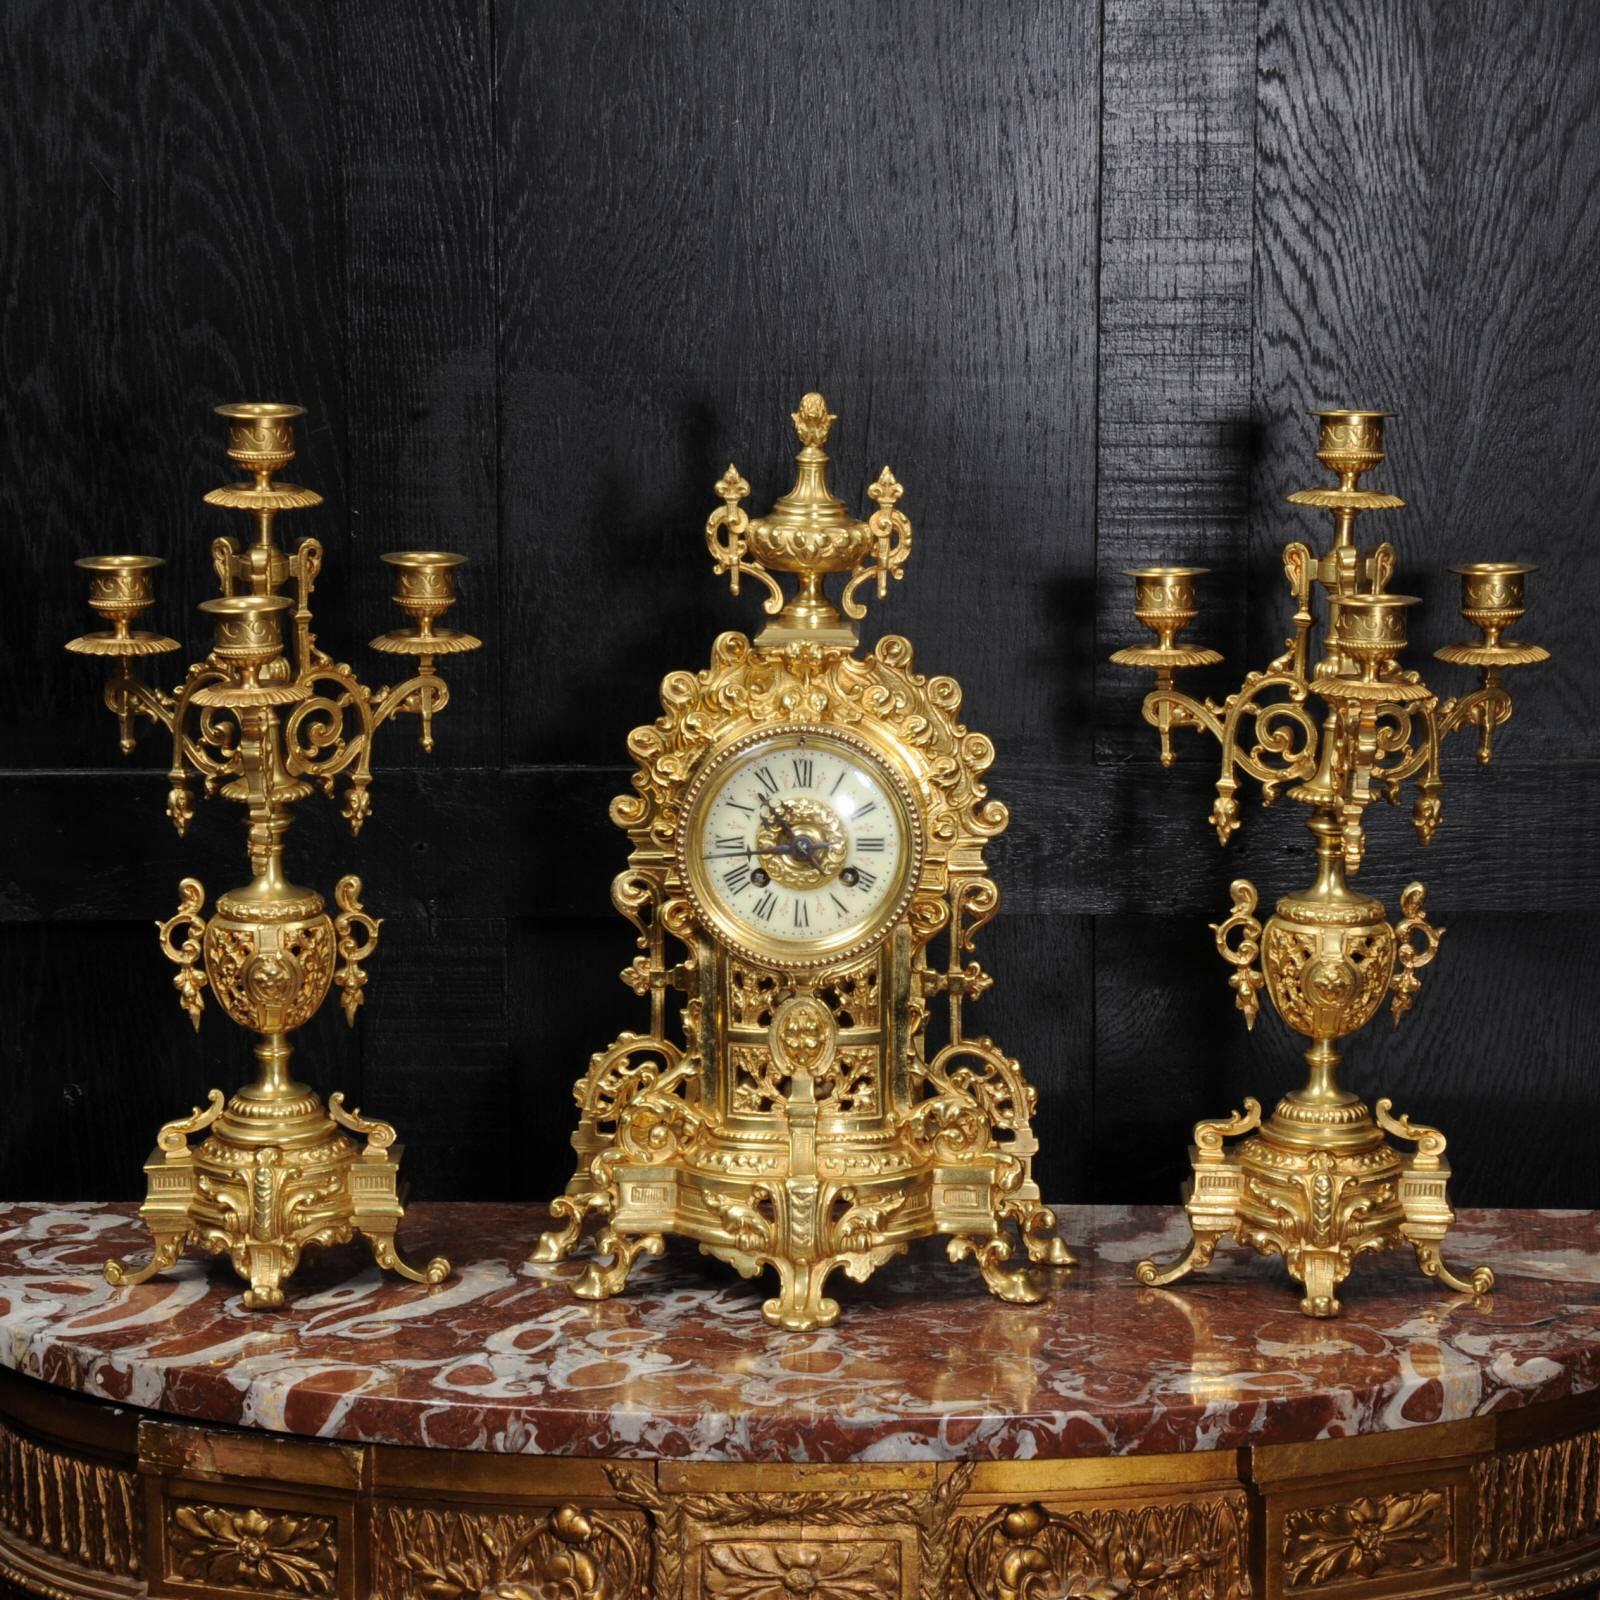 A lovely original antique French gilt bronze clock set, circa 1880. Classical in design with elaborate acanthus decoration, fretted to the front to allow the pendulum to be seen gently swinging within. Candelabra are conforming in style with three